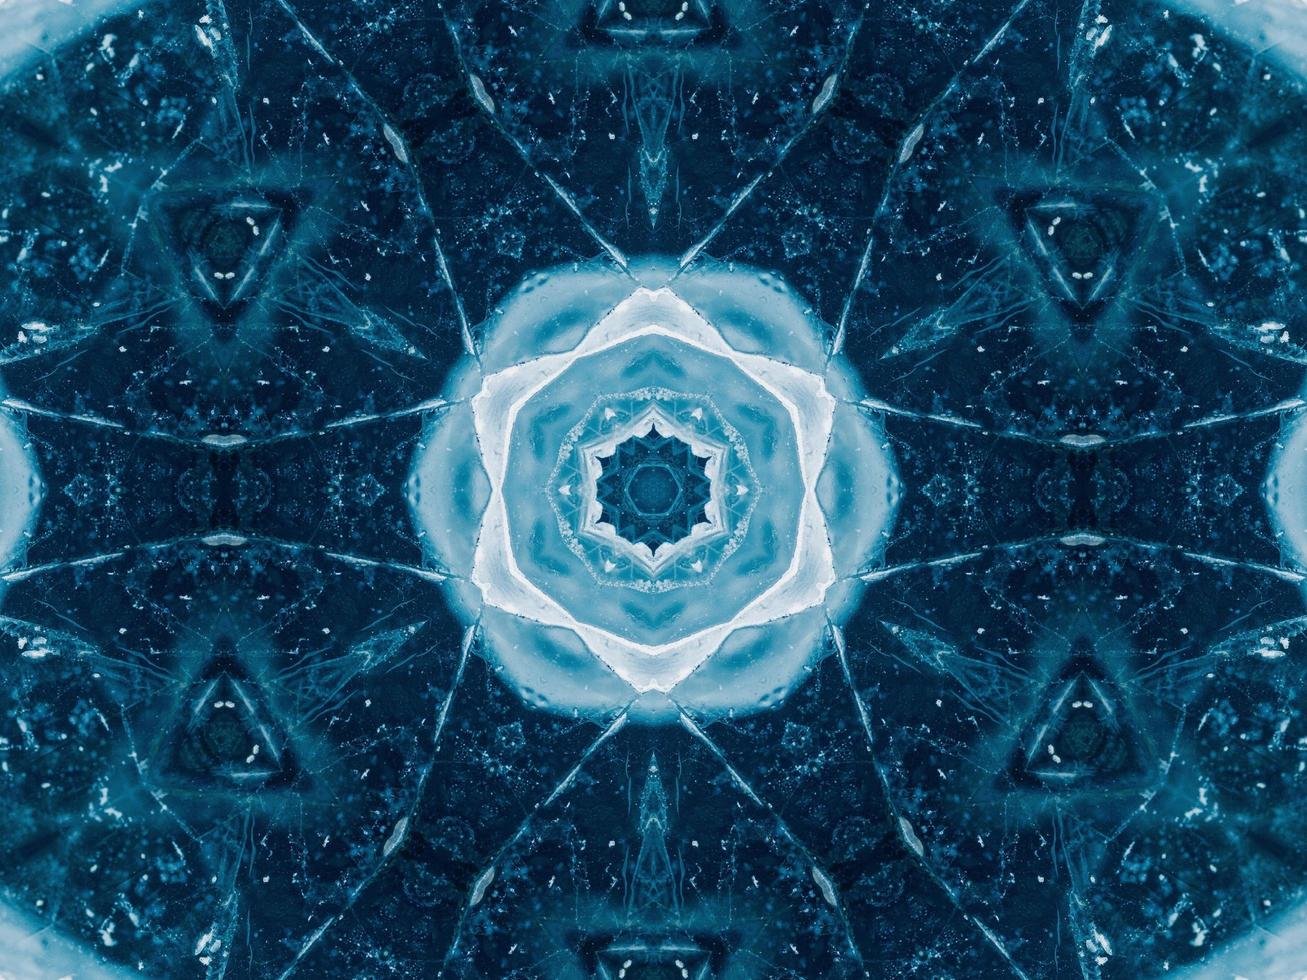 Reflection of deep blue sea in kaleidoscope pattern. Dark blue abstract background. Free photo. photo